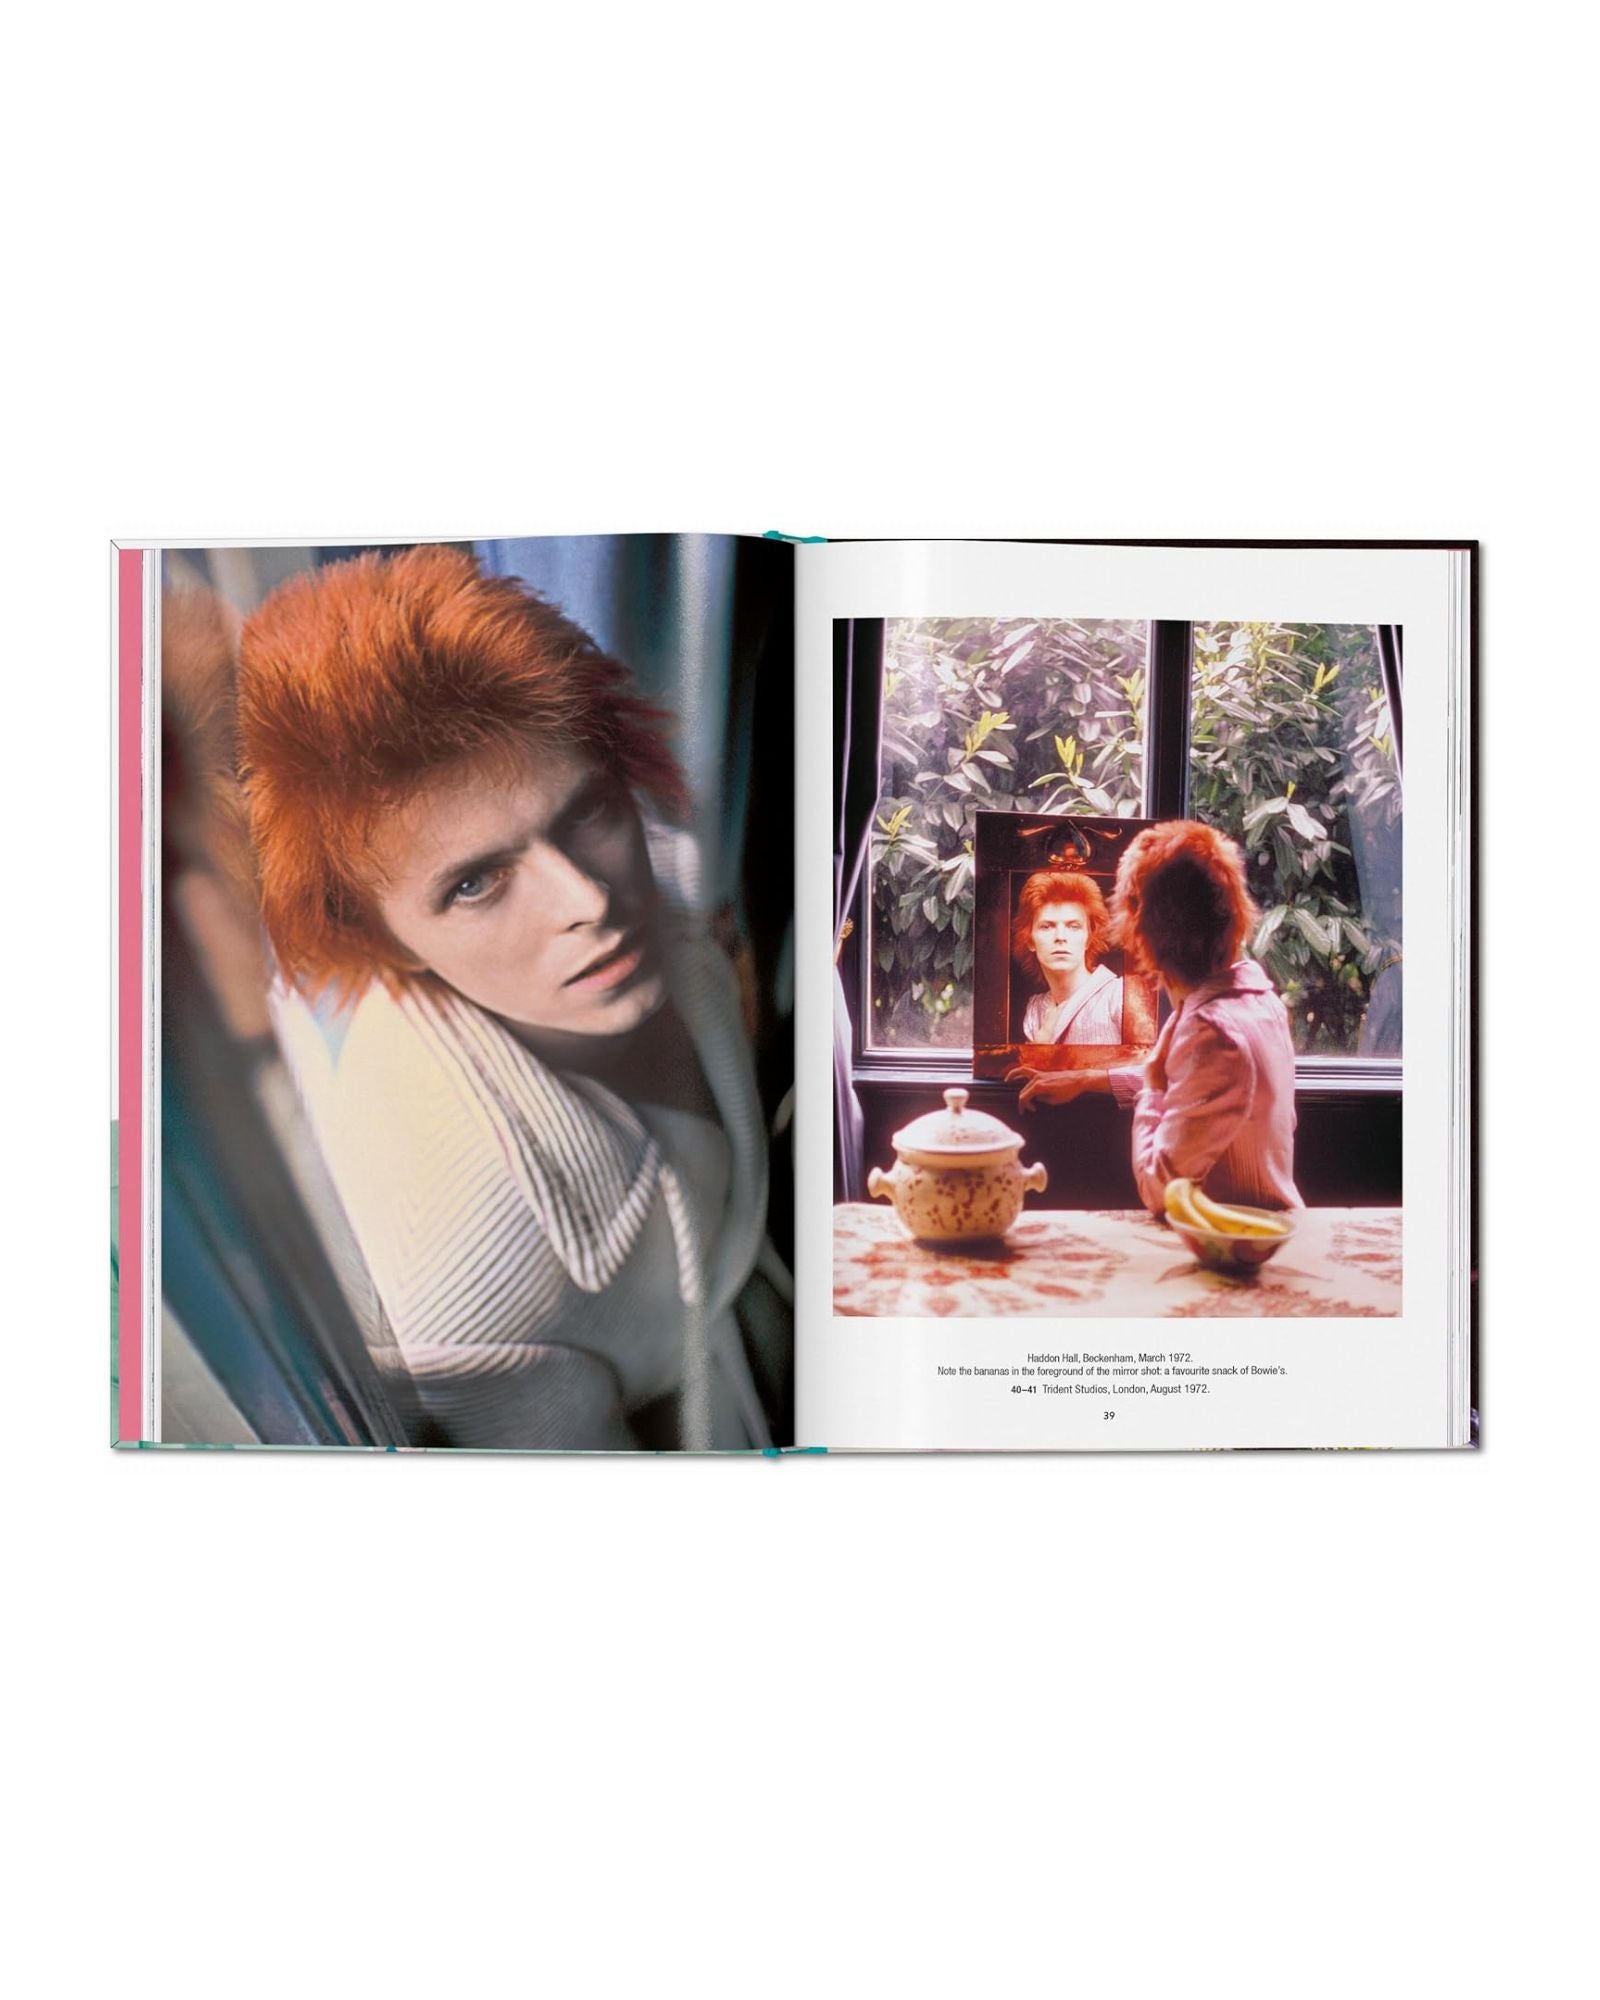 THE RISE OF DAVID BOWIE - BOOK